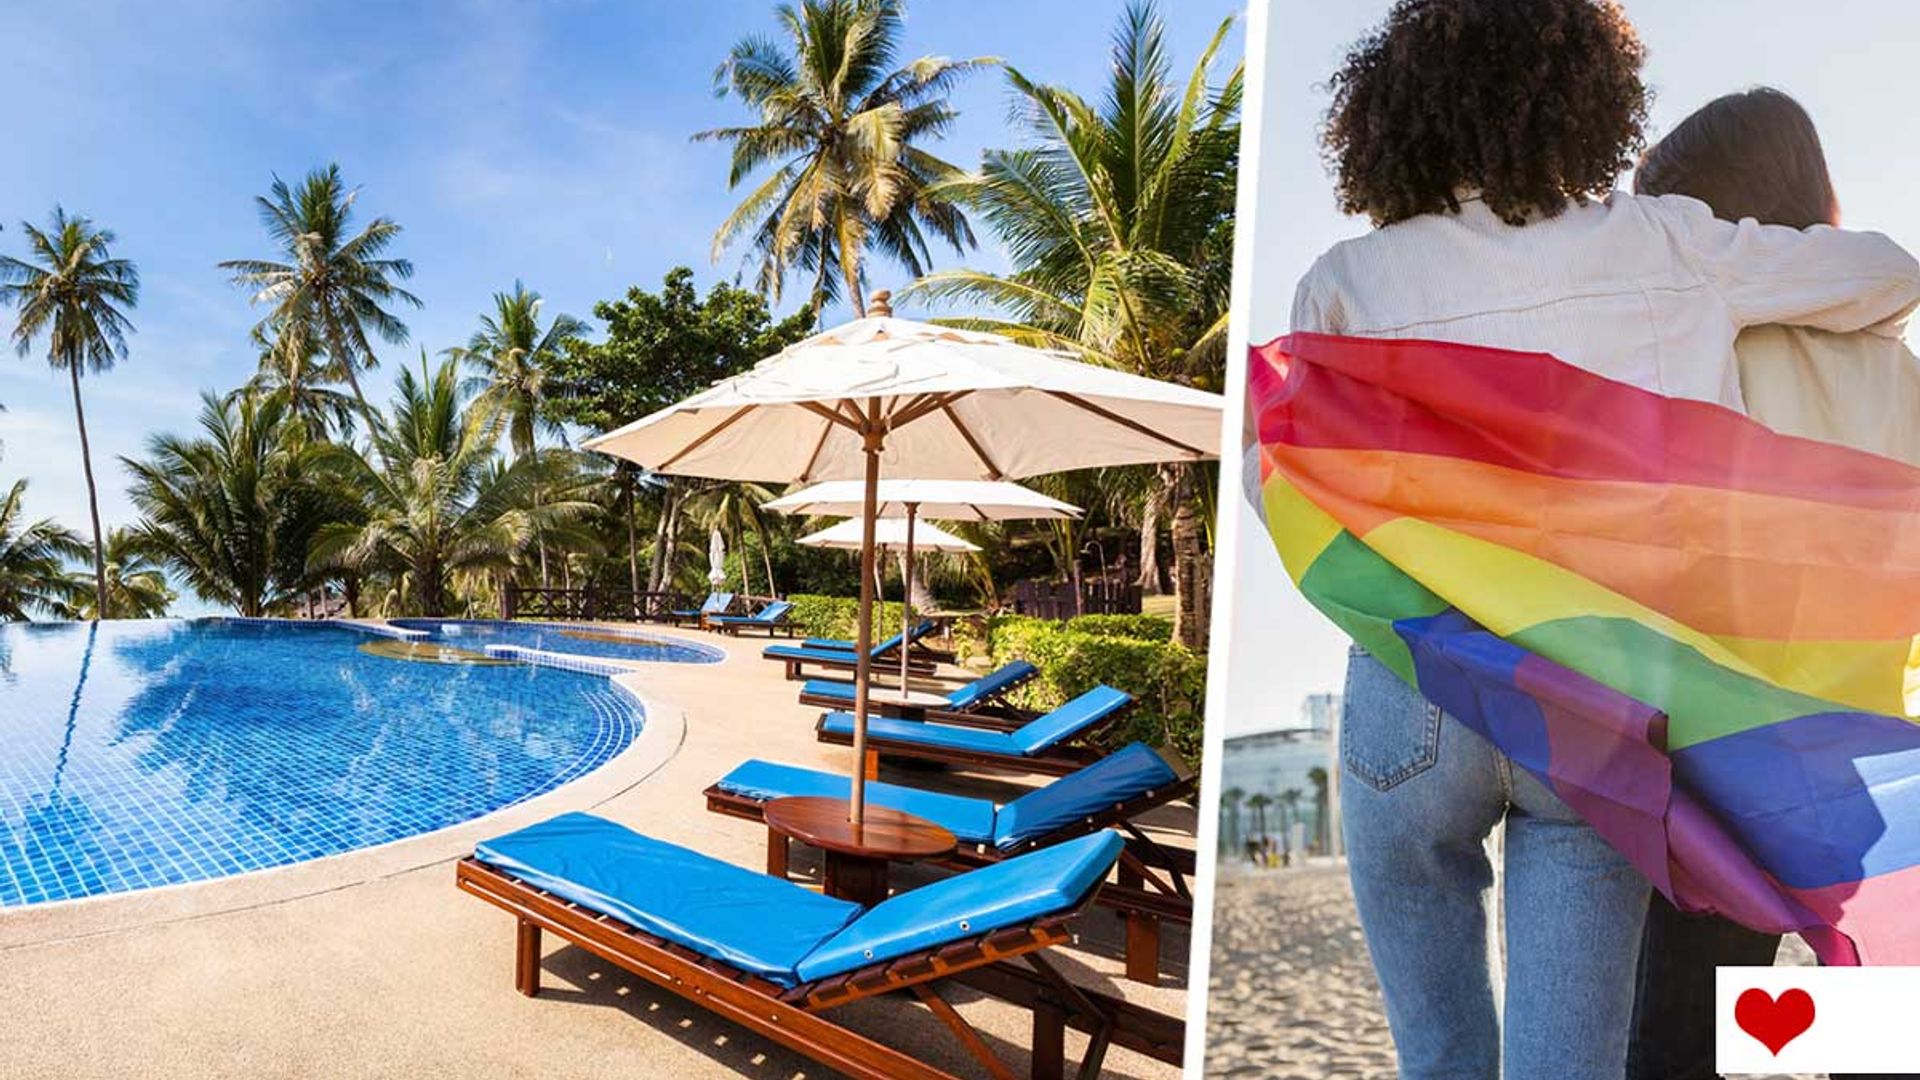 9 LGBTQ+ friendly hotels around the world you need to visit - a definitive guide